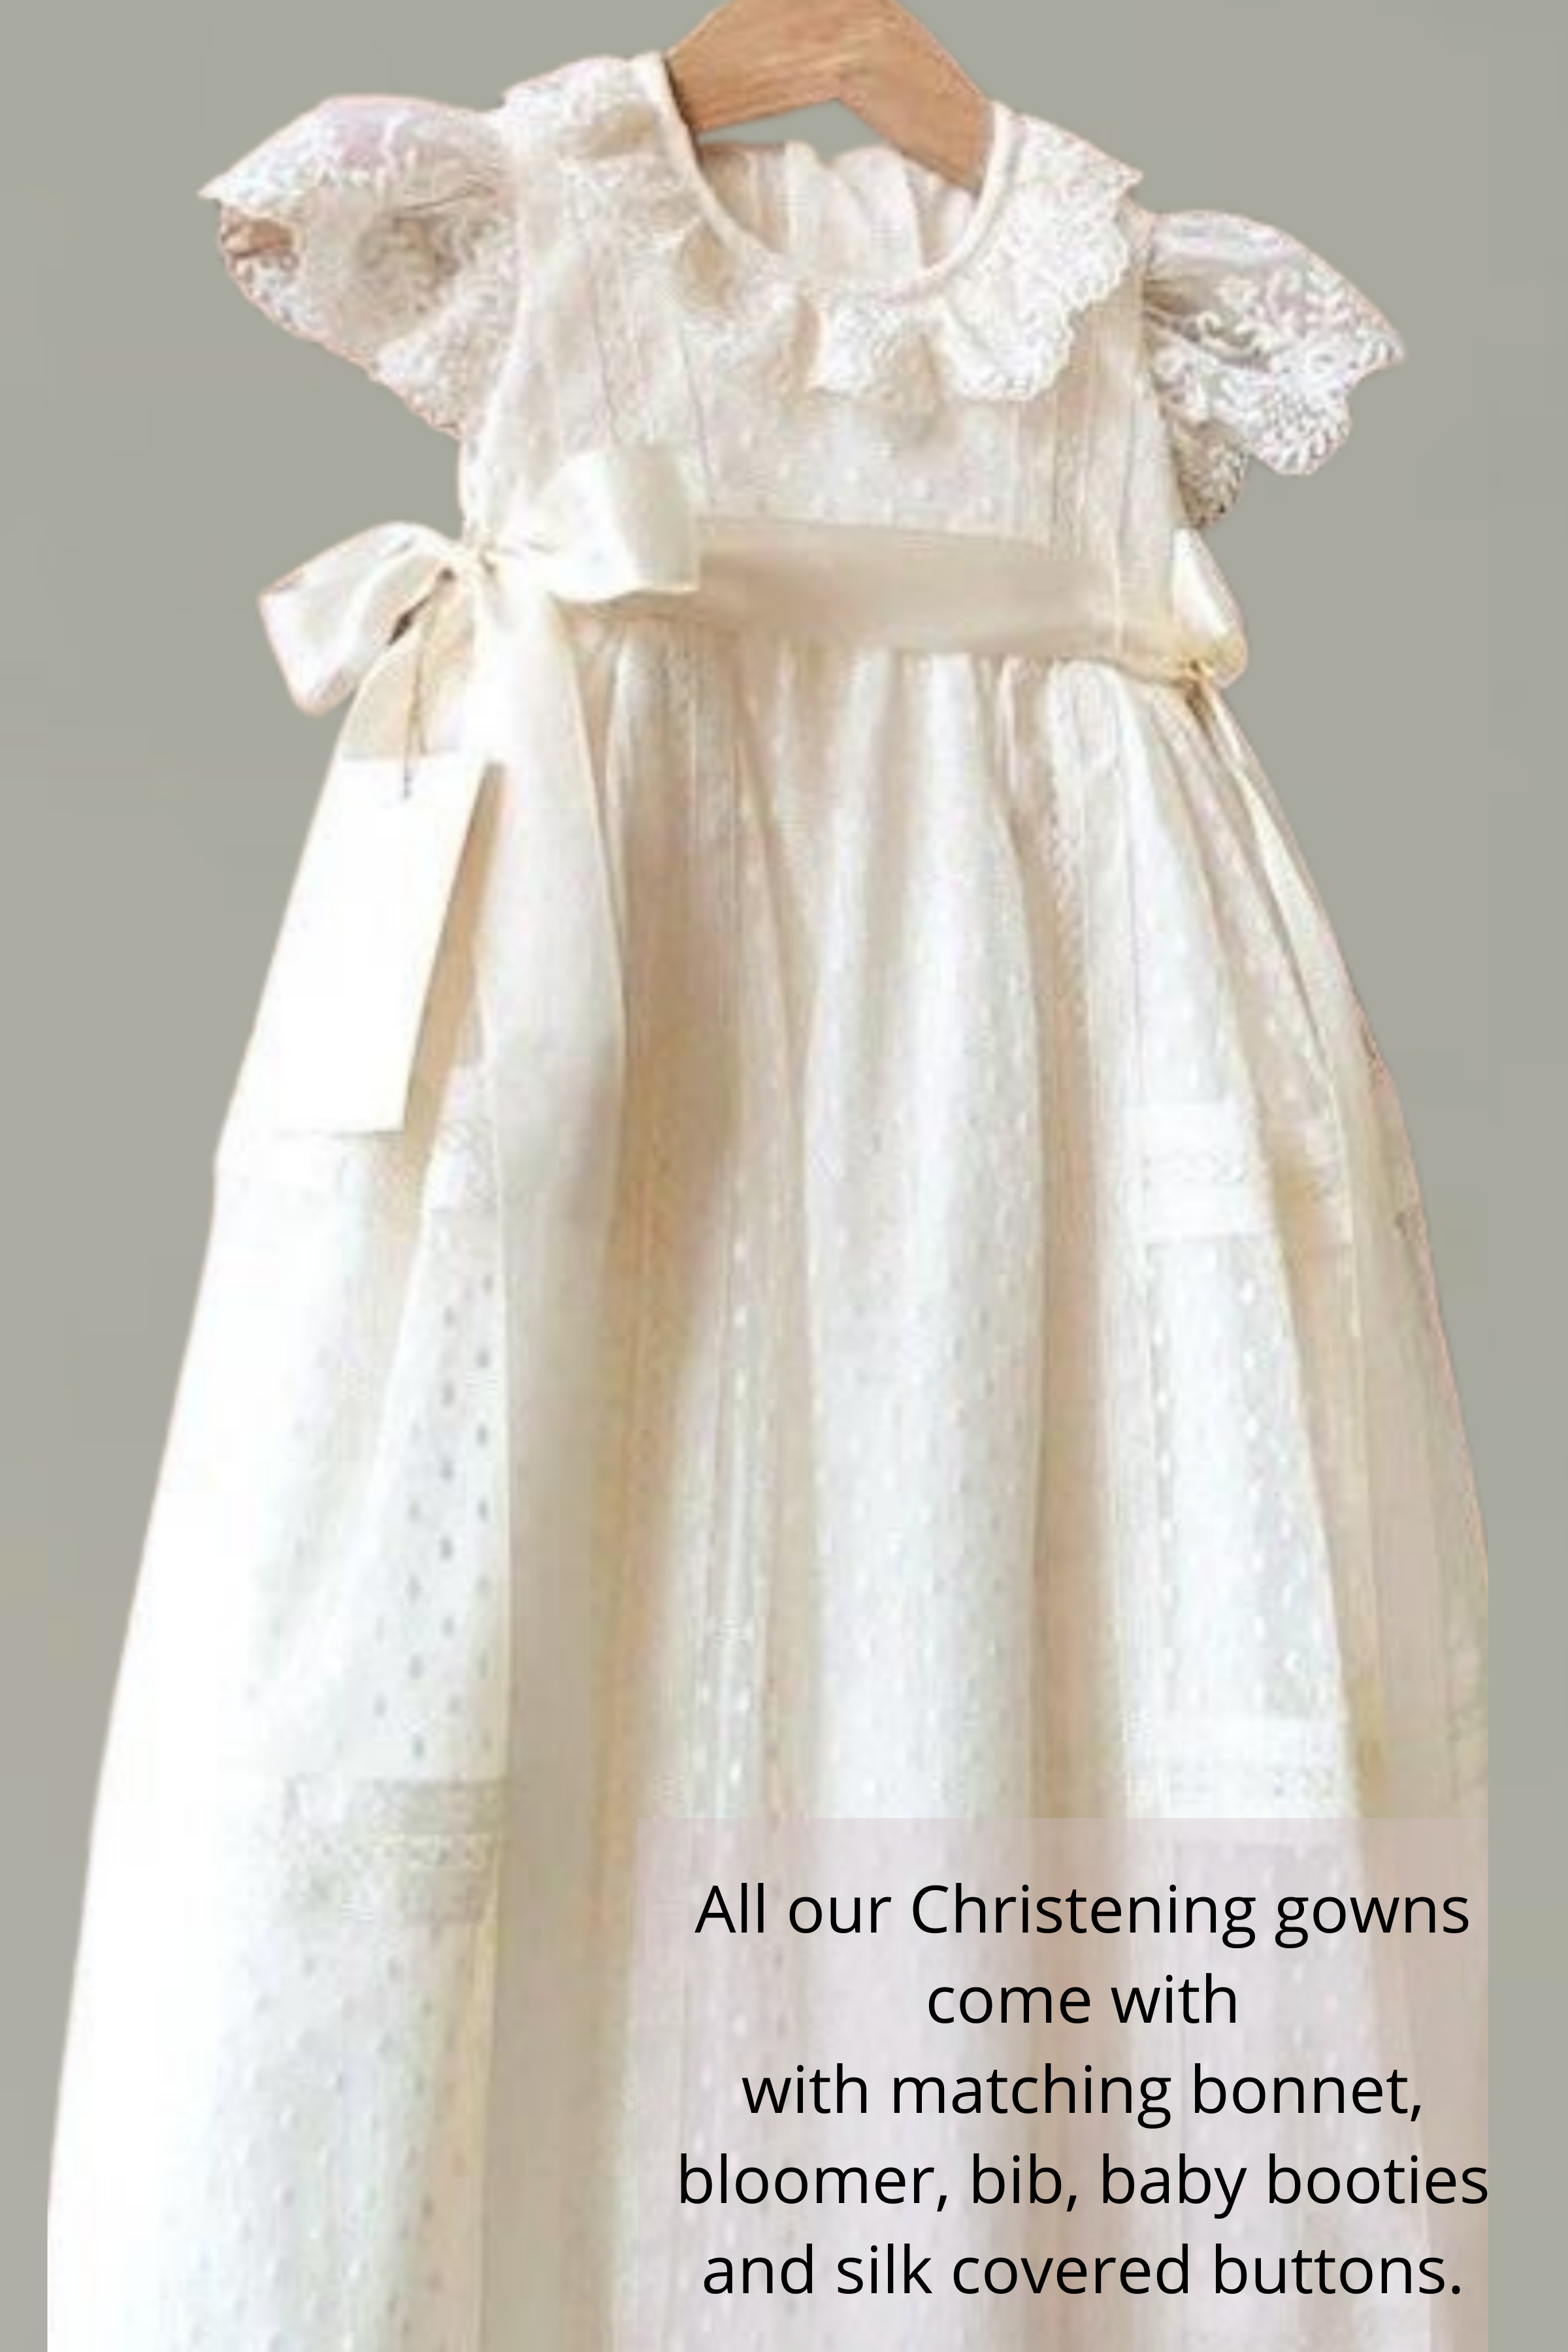 Girls Christening outfits | Christening Gowns